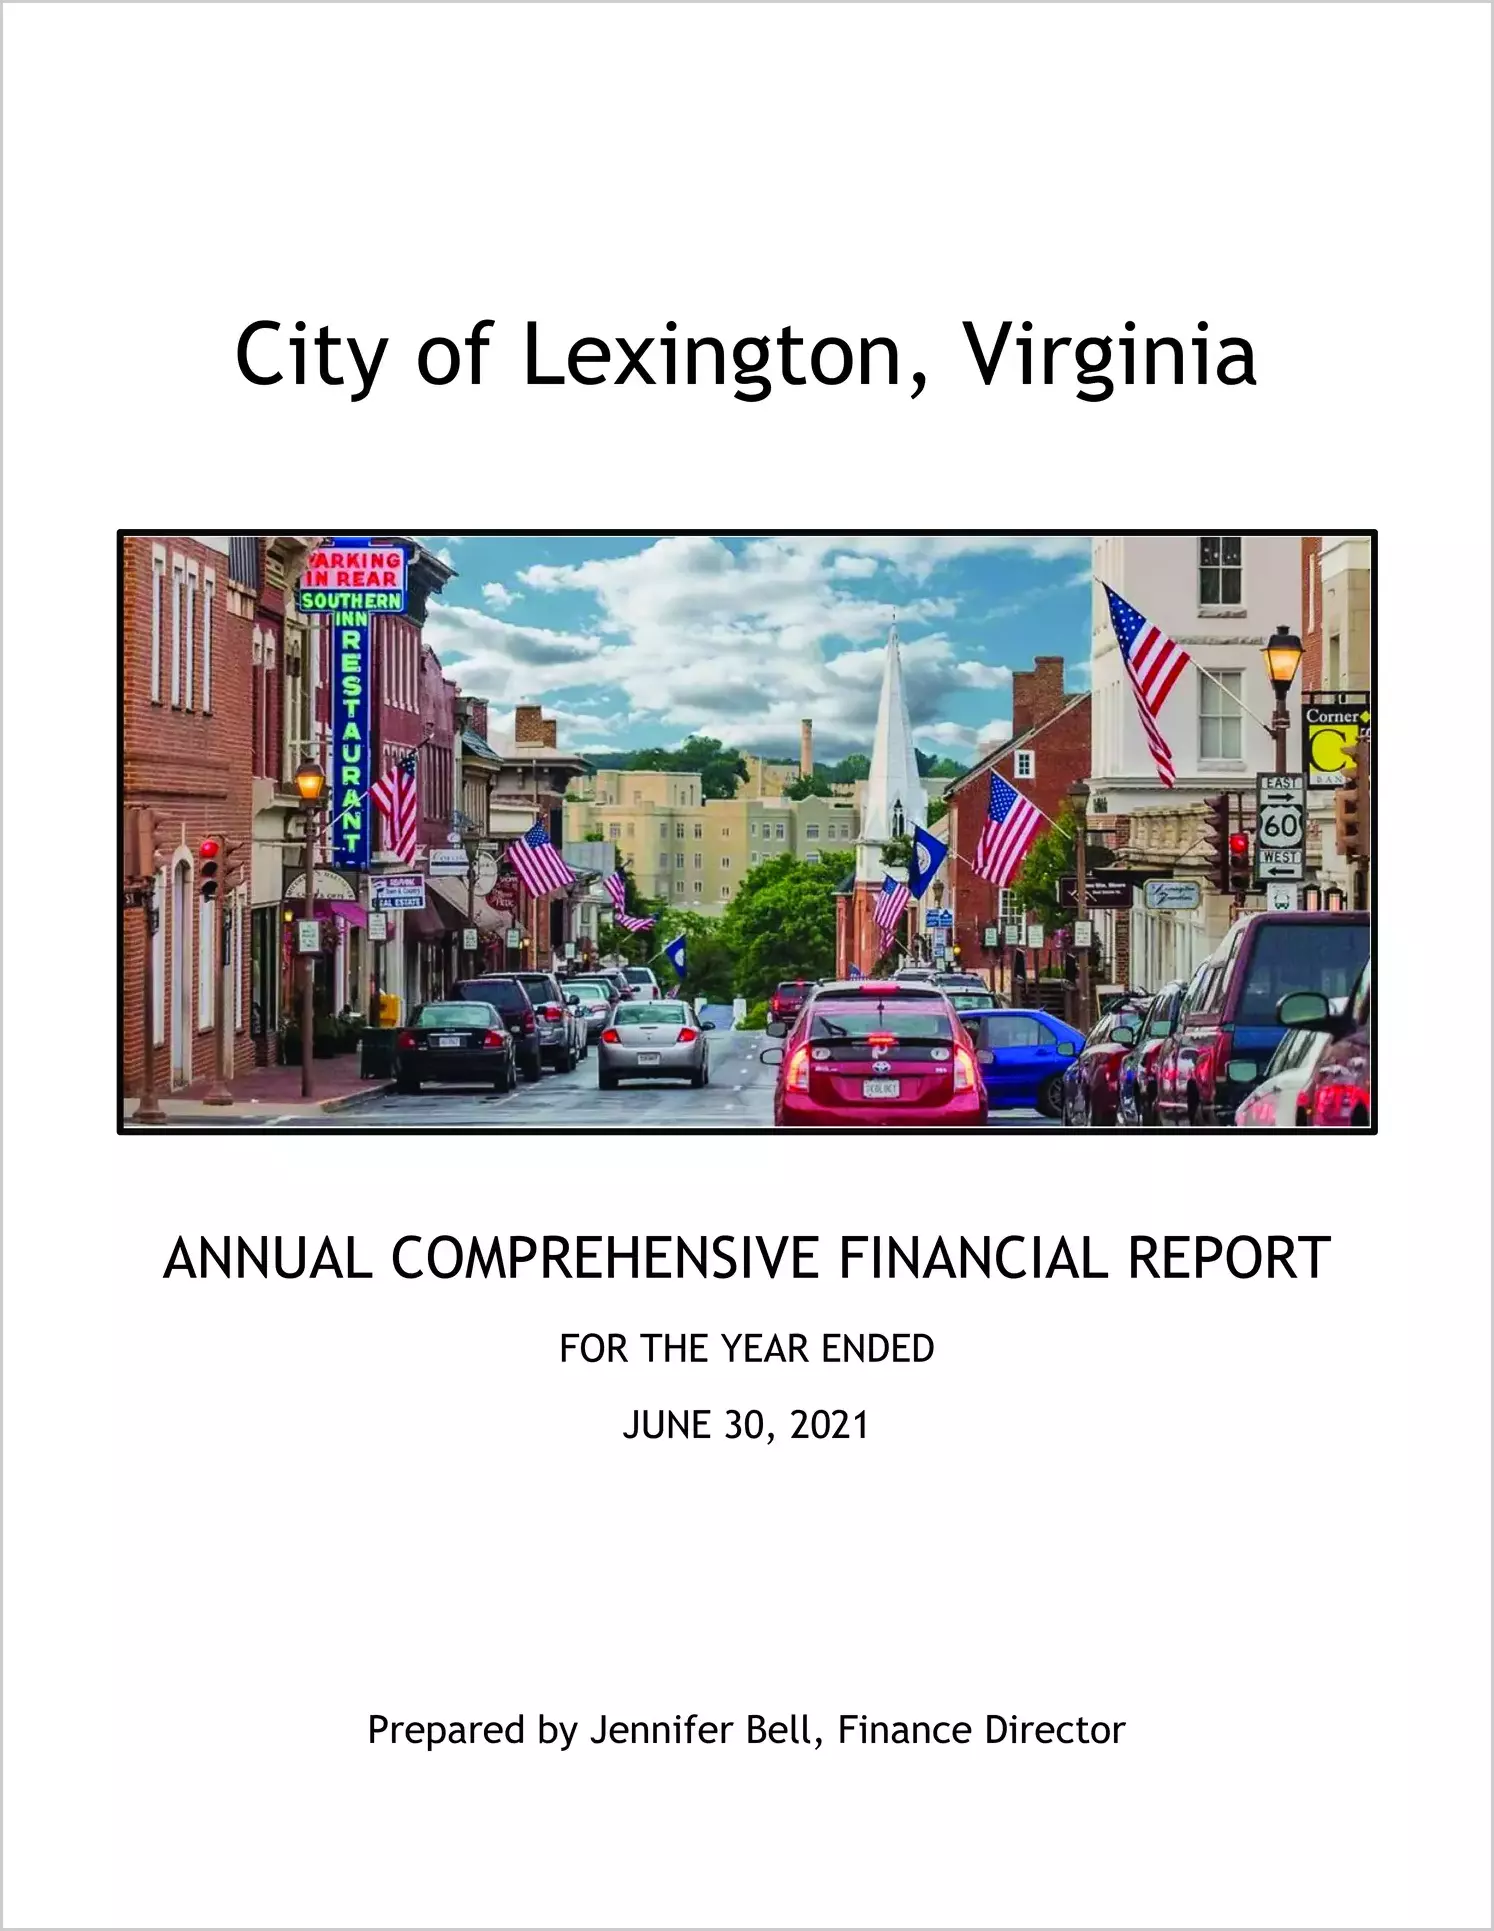 2021 Annual Financial Report for City of Lexington